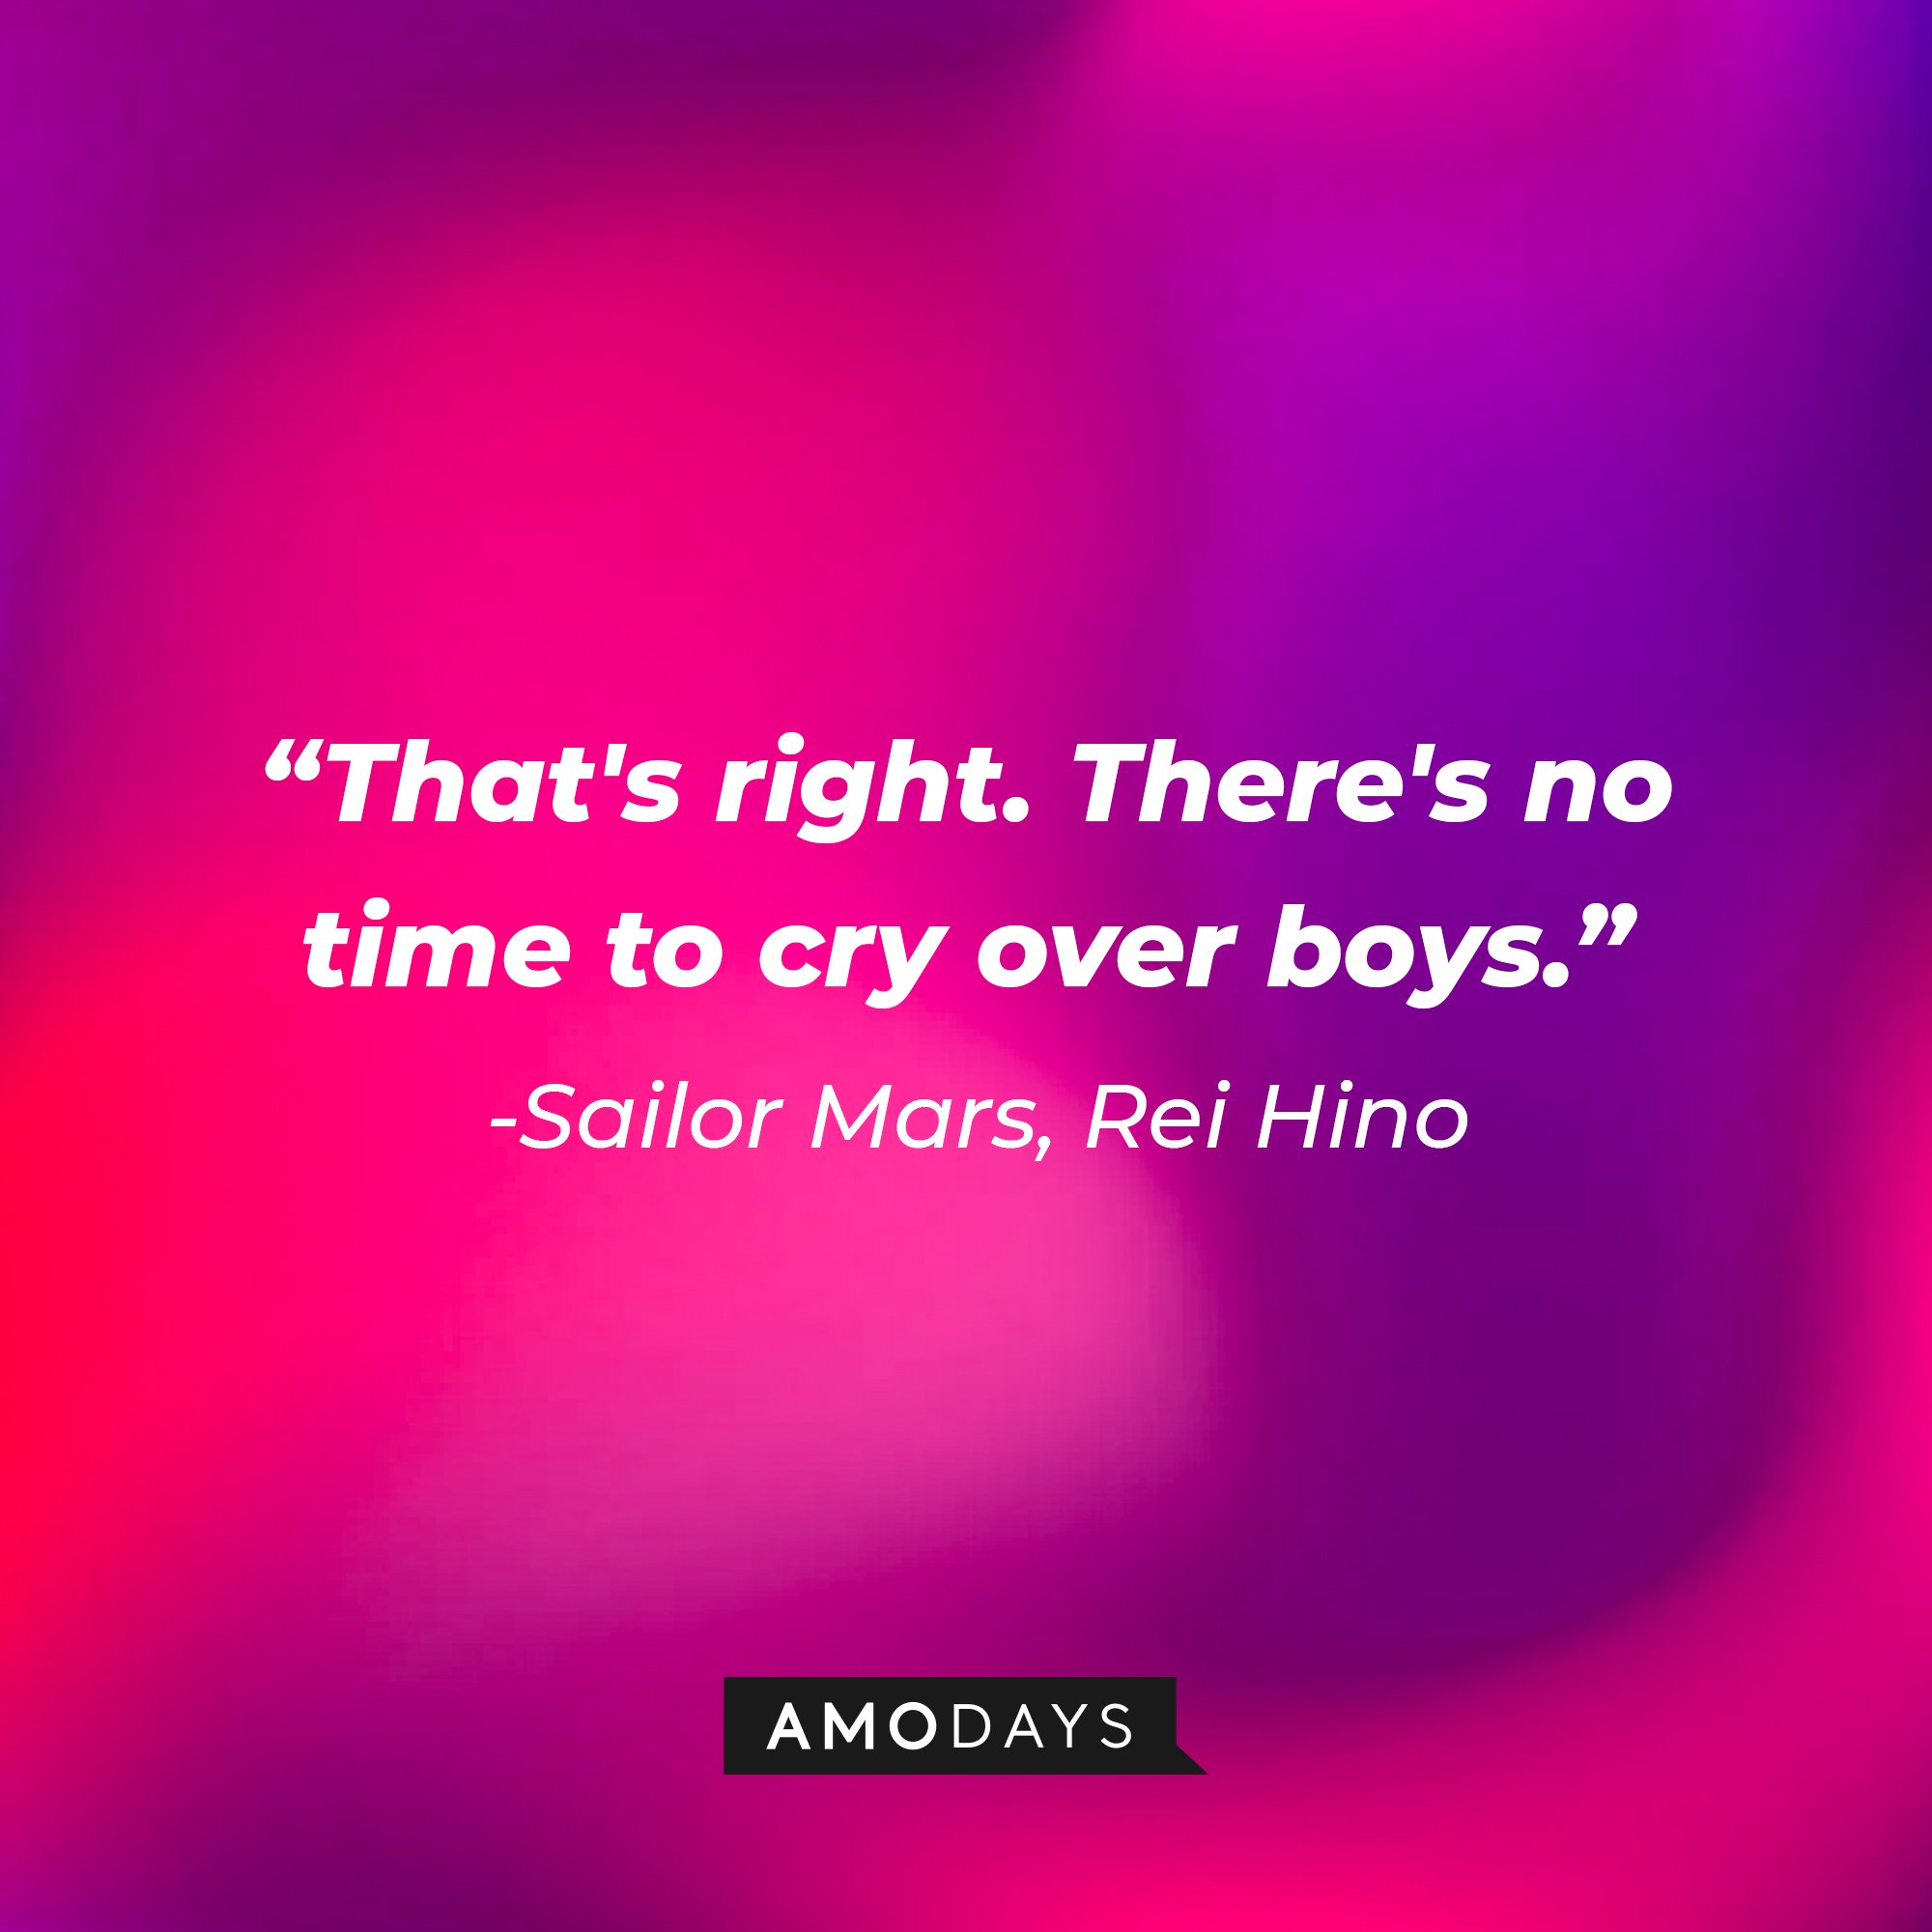 Sailor Mars/Rei Hino’s quote: "That's right. There's no time to cry over boys."  | Image: Amodays